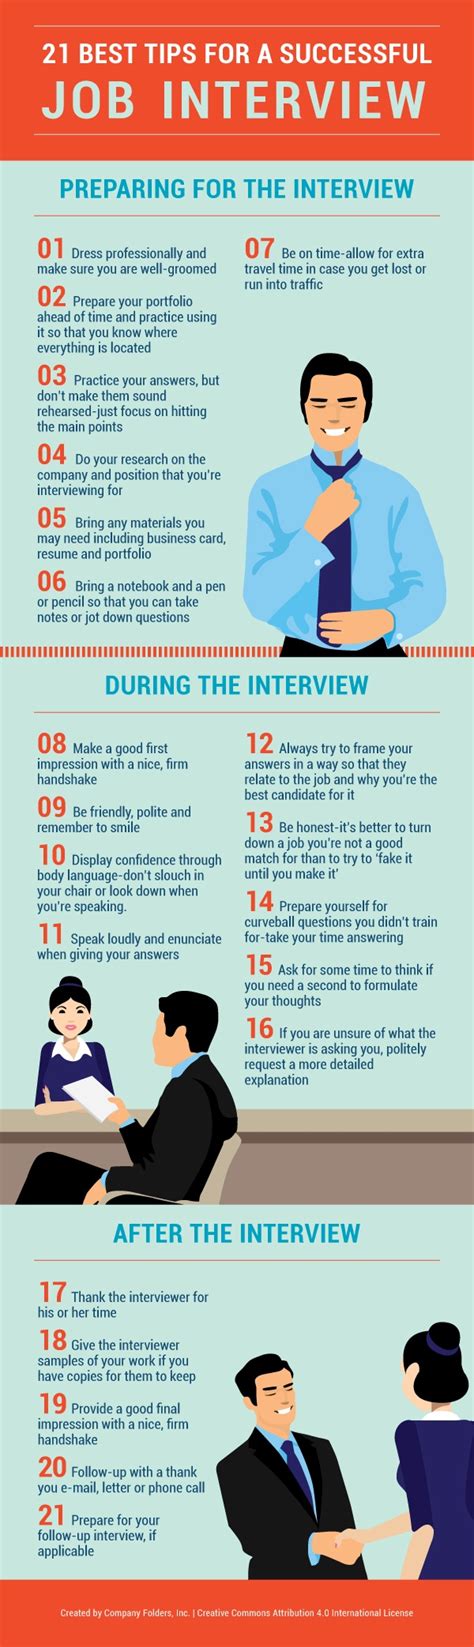 Interview a quick guide to winning the job interviews. - How to install mobile apps on android devices guide.